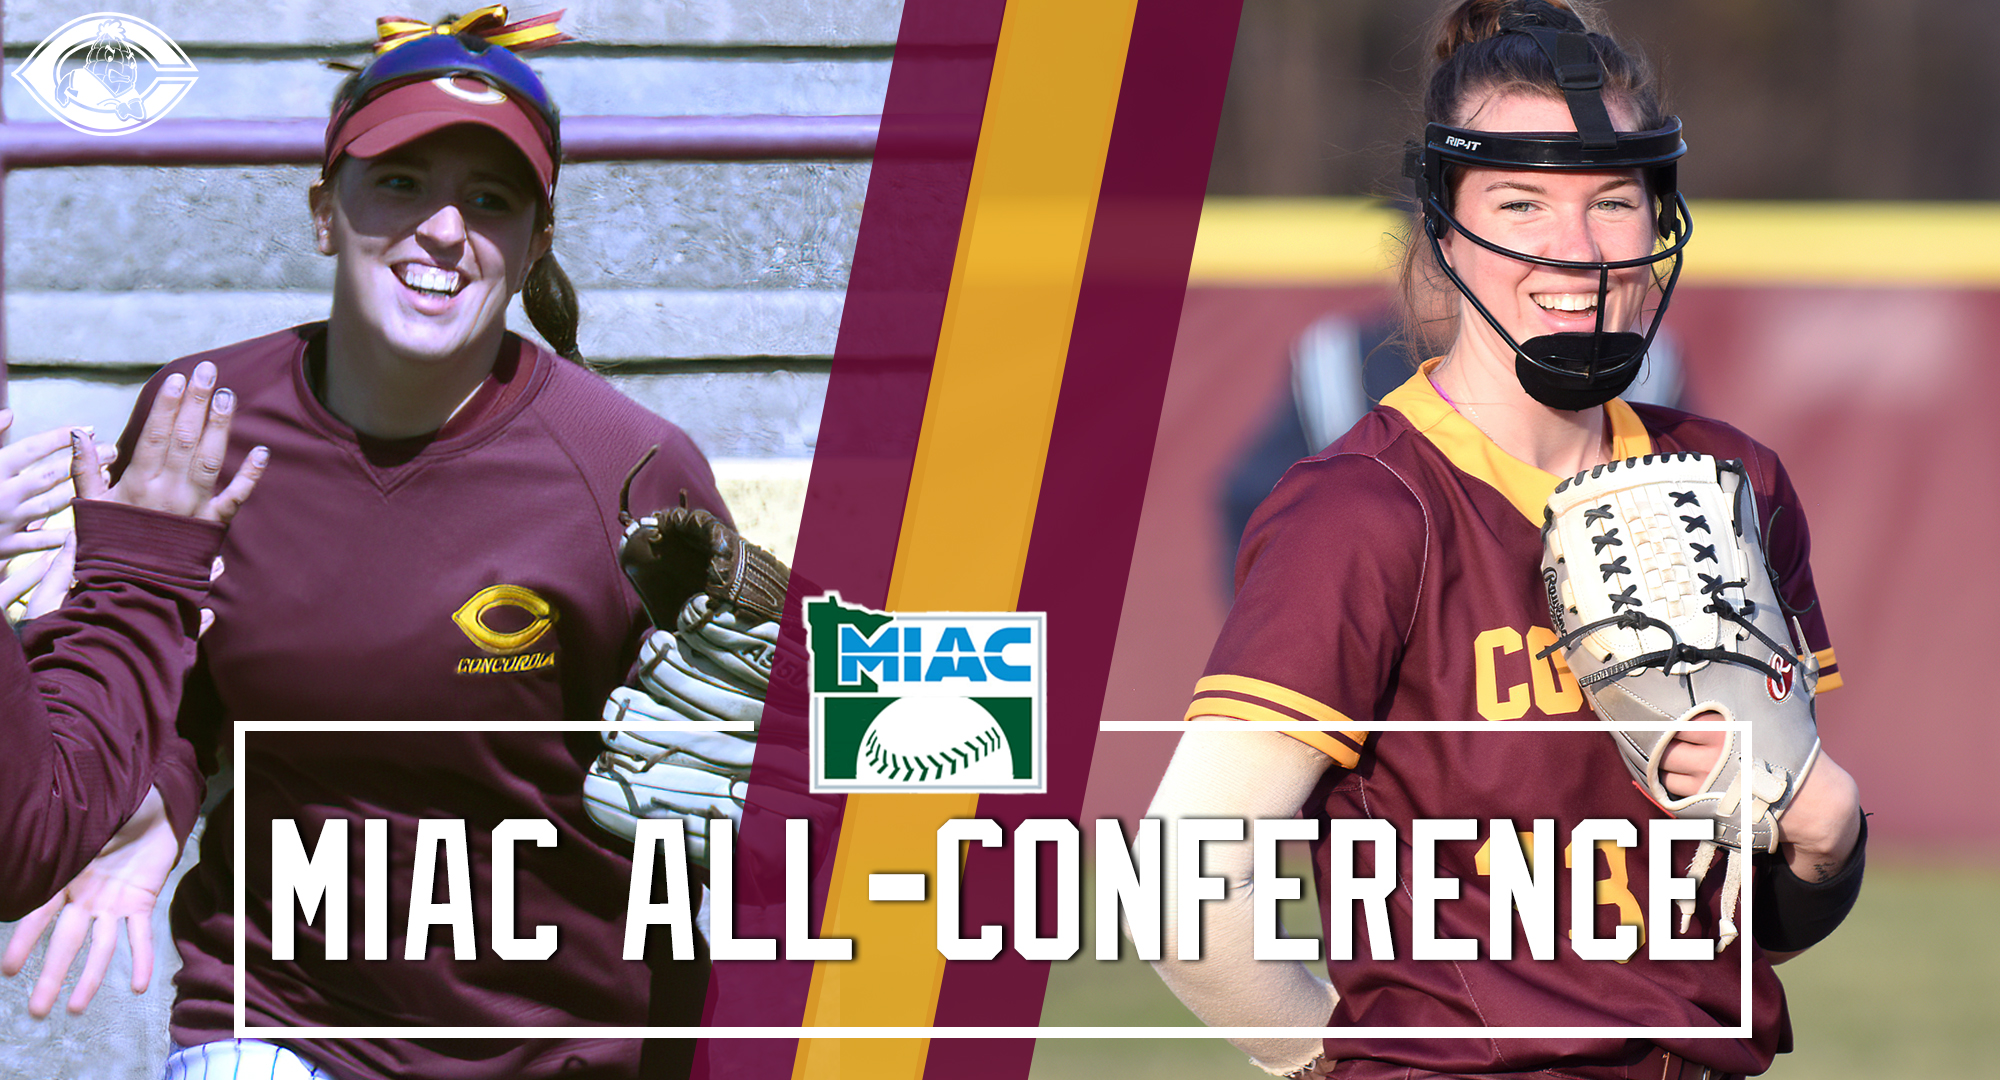 Kenzie Leither (L) and Megan Gavin were both honored with MIAC All-Conference postseason awards.